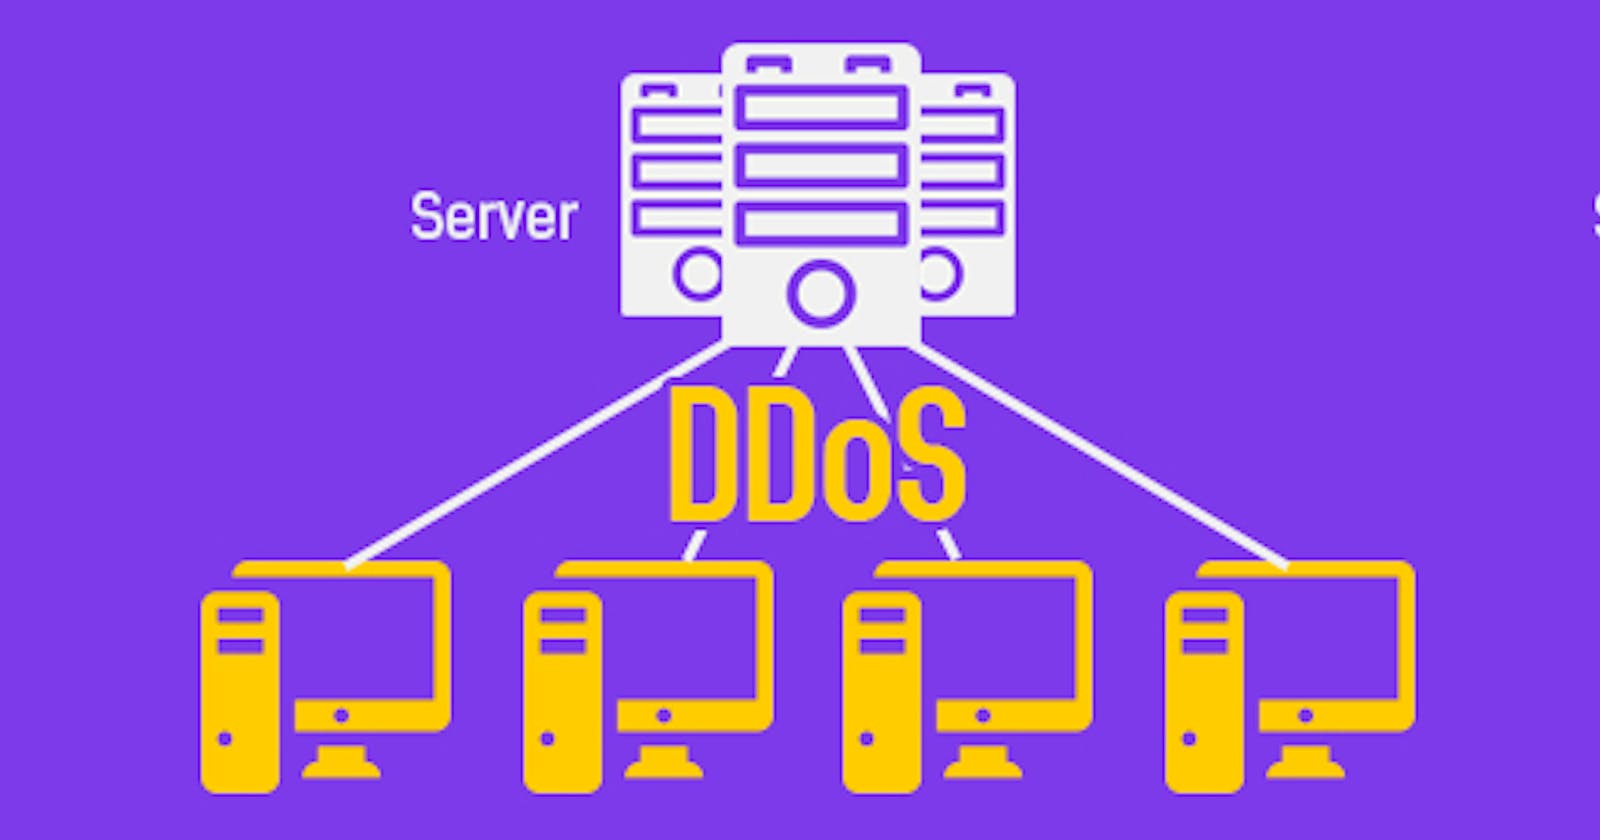 Differences Between Ddos And Dos